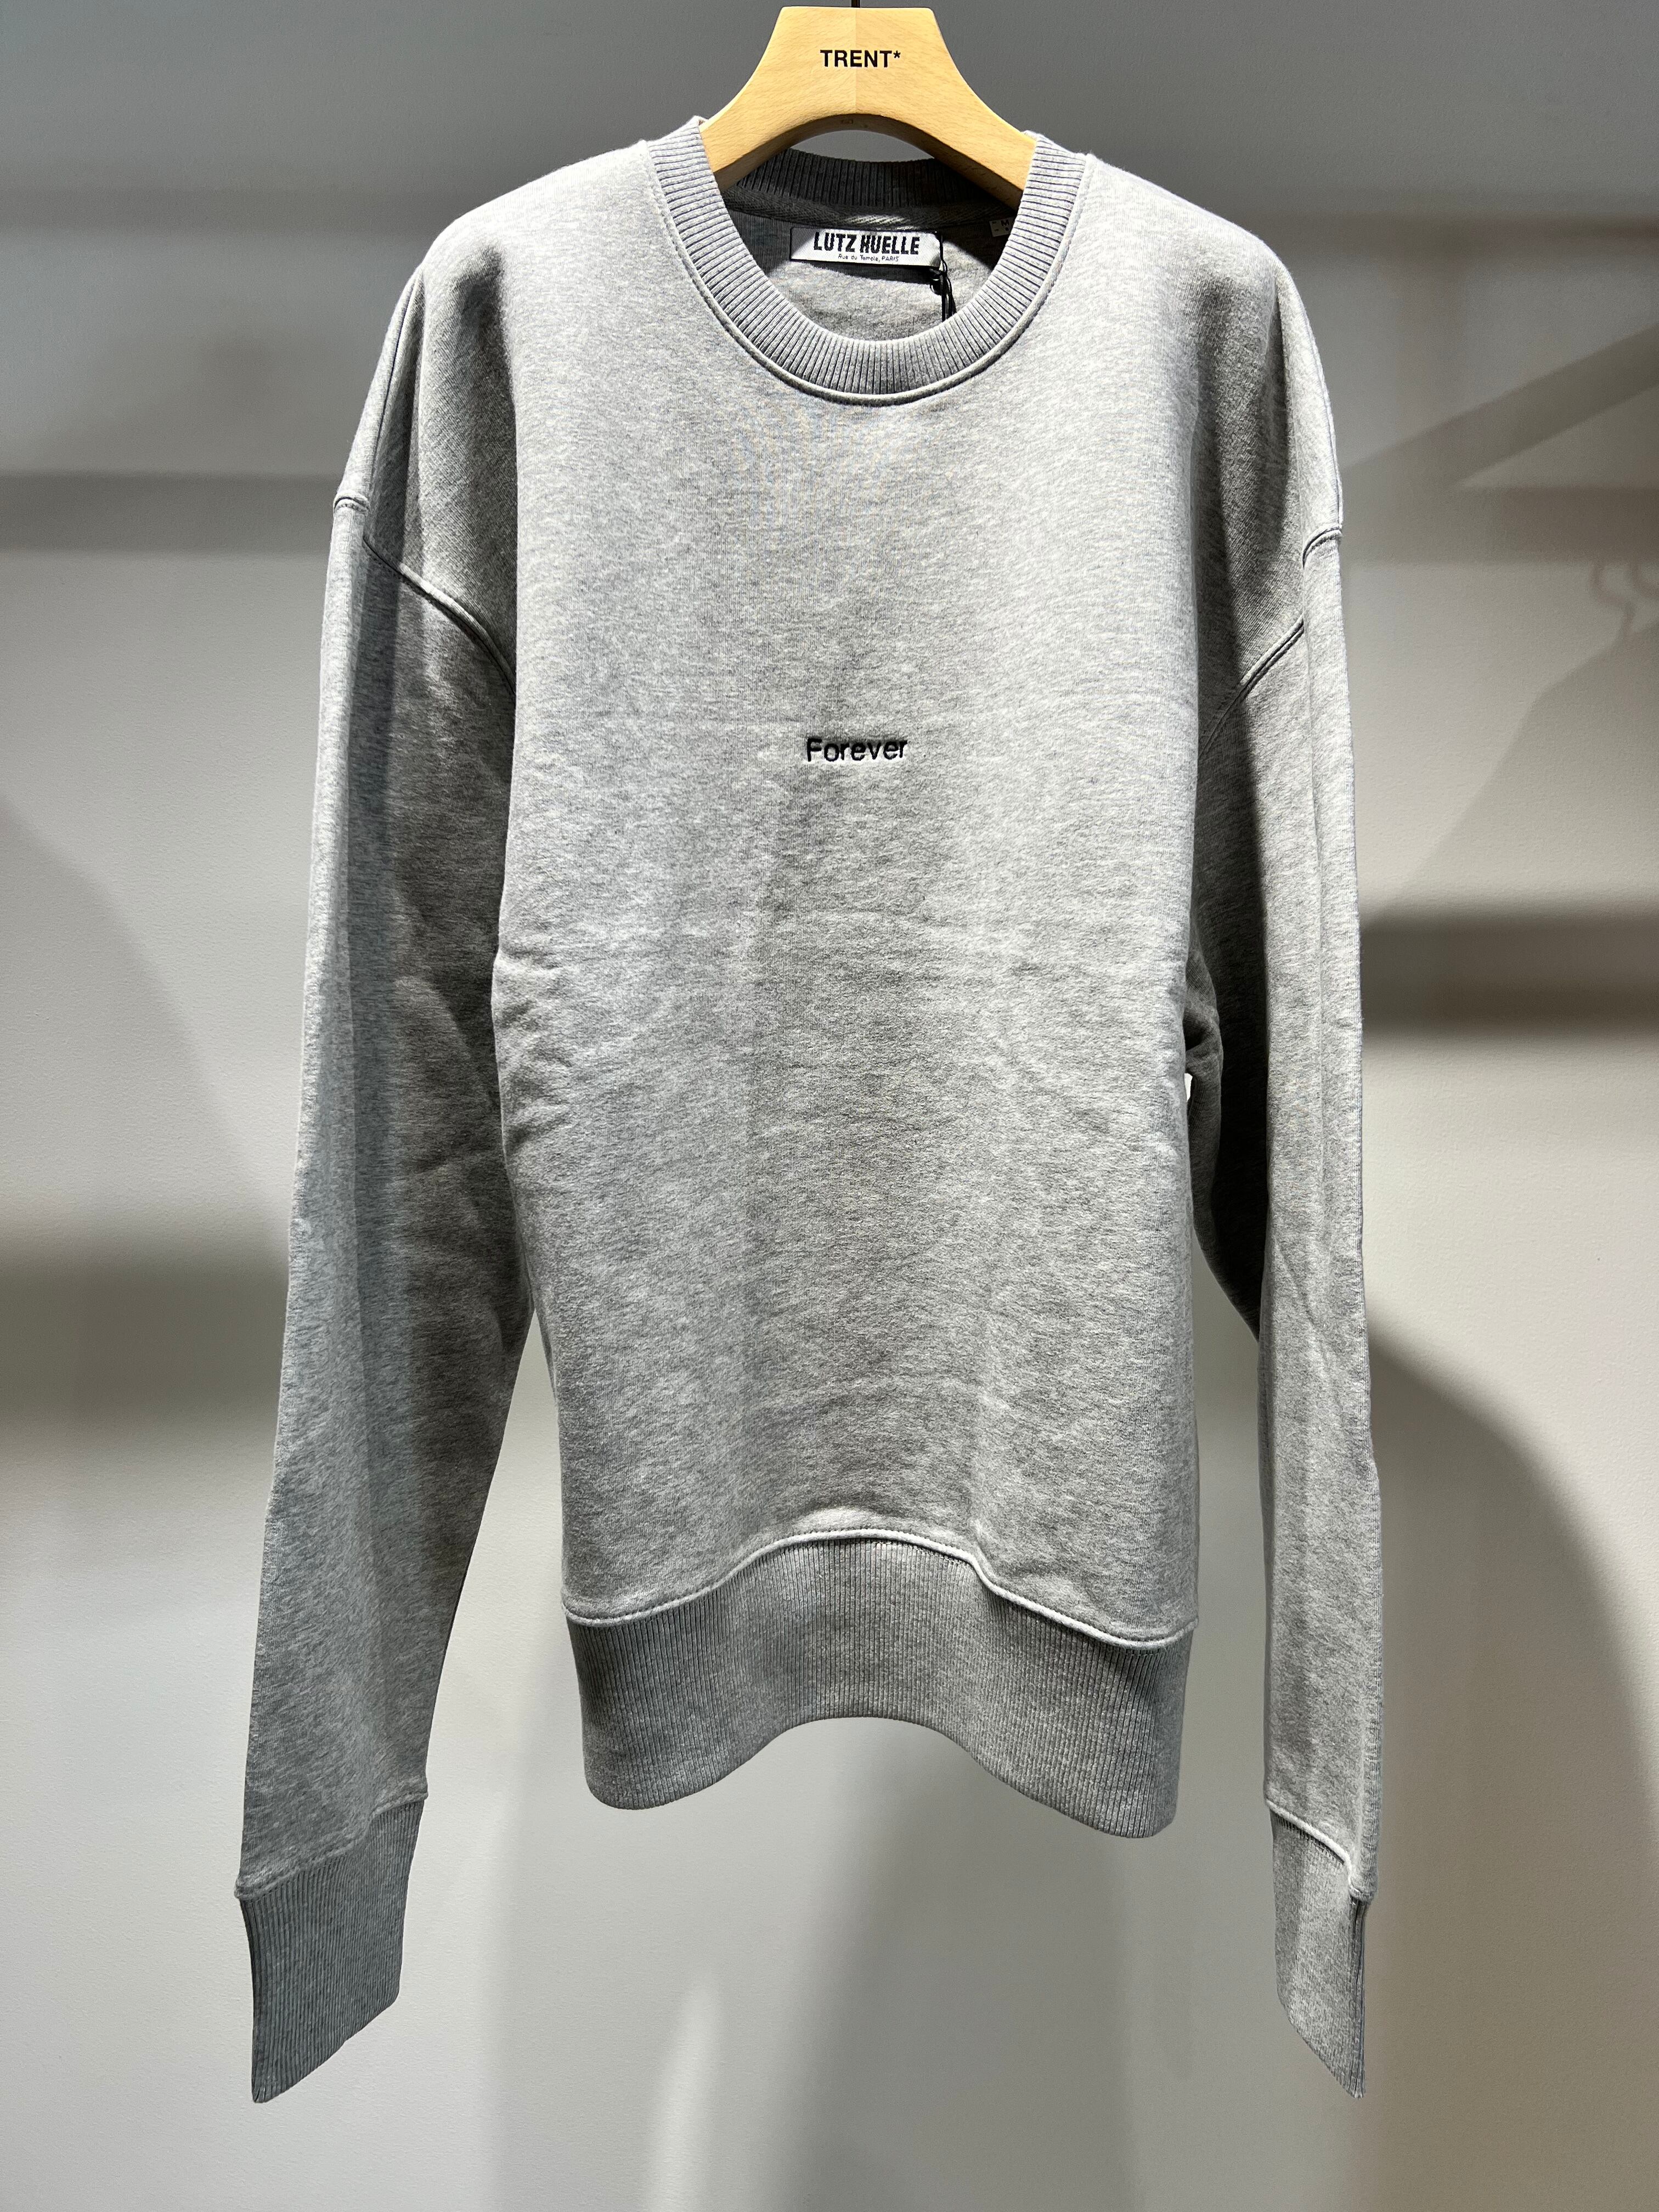 23SS】LUTZ HUELLE / ルッツヒュエル / FOREVER SWEAT | TRENT 